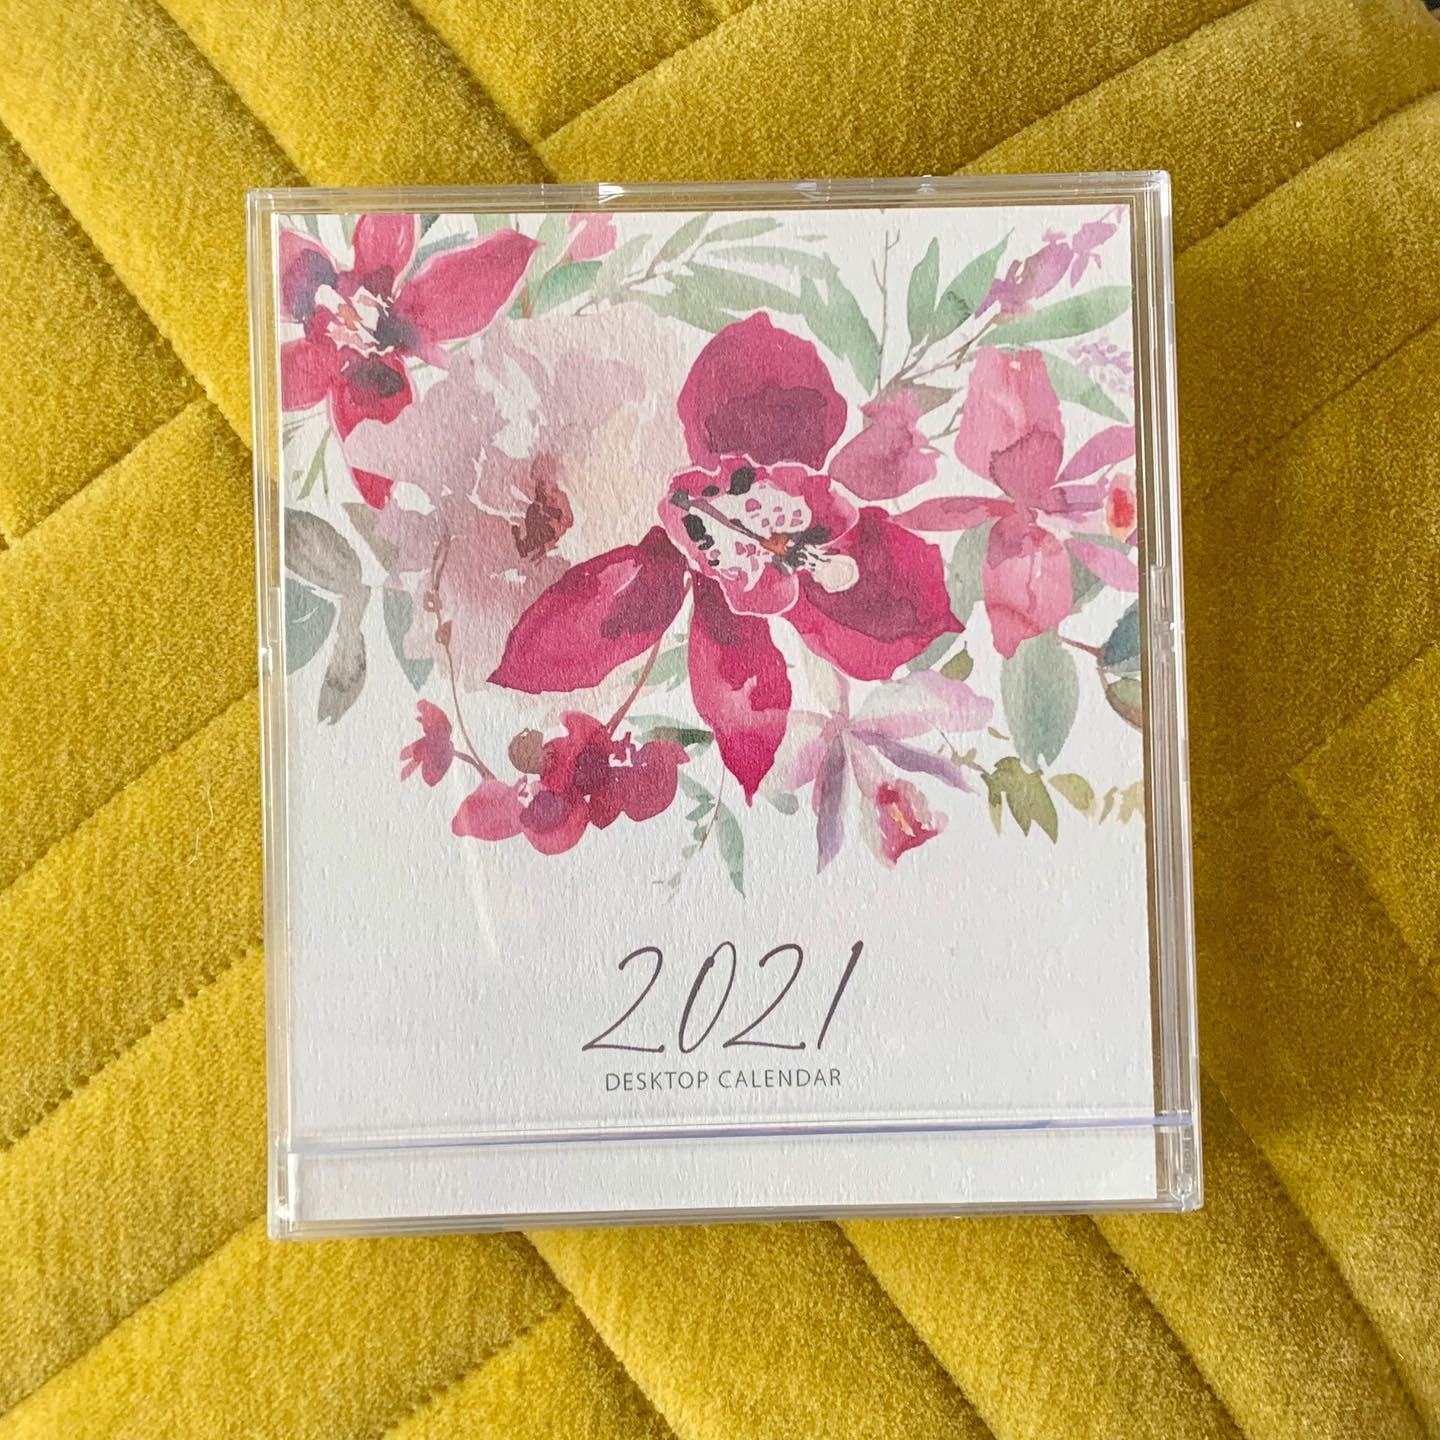 Say goodbye to 2020&hellip;. 2021 Floral Desktop Calendars will be available on my #Etsy site this Wednesday 10/1!
&bull;
#2021 #2021calendar #desktopcalendar #fuck2020 #goodbye2020 #art #design #illustration #painting #floral #flowers #dailydoseofco